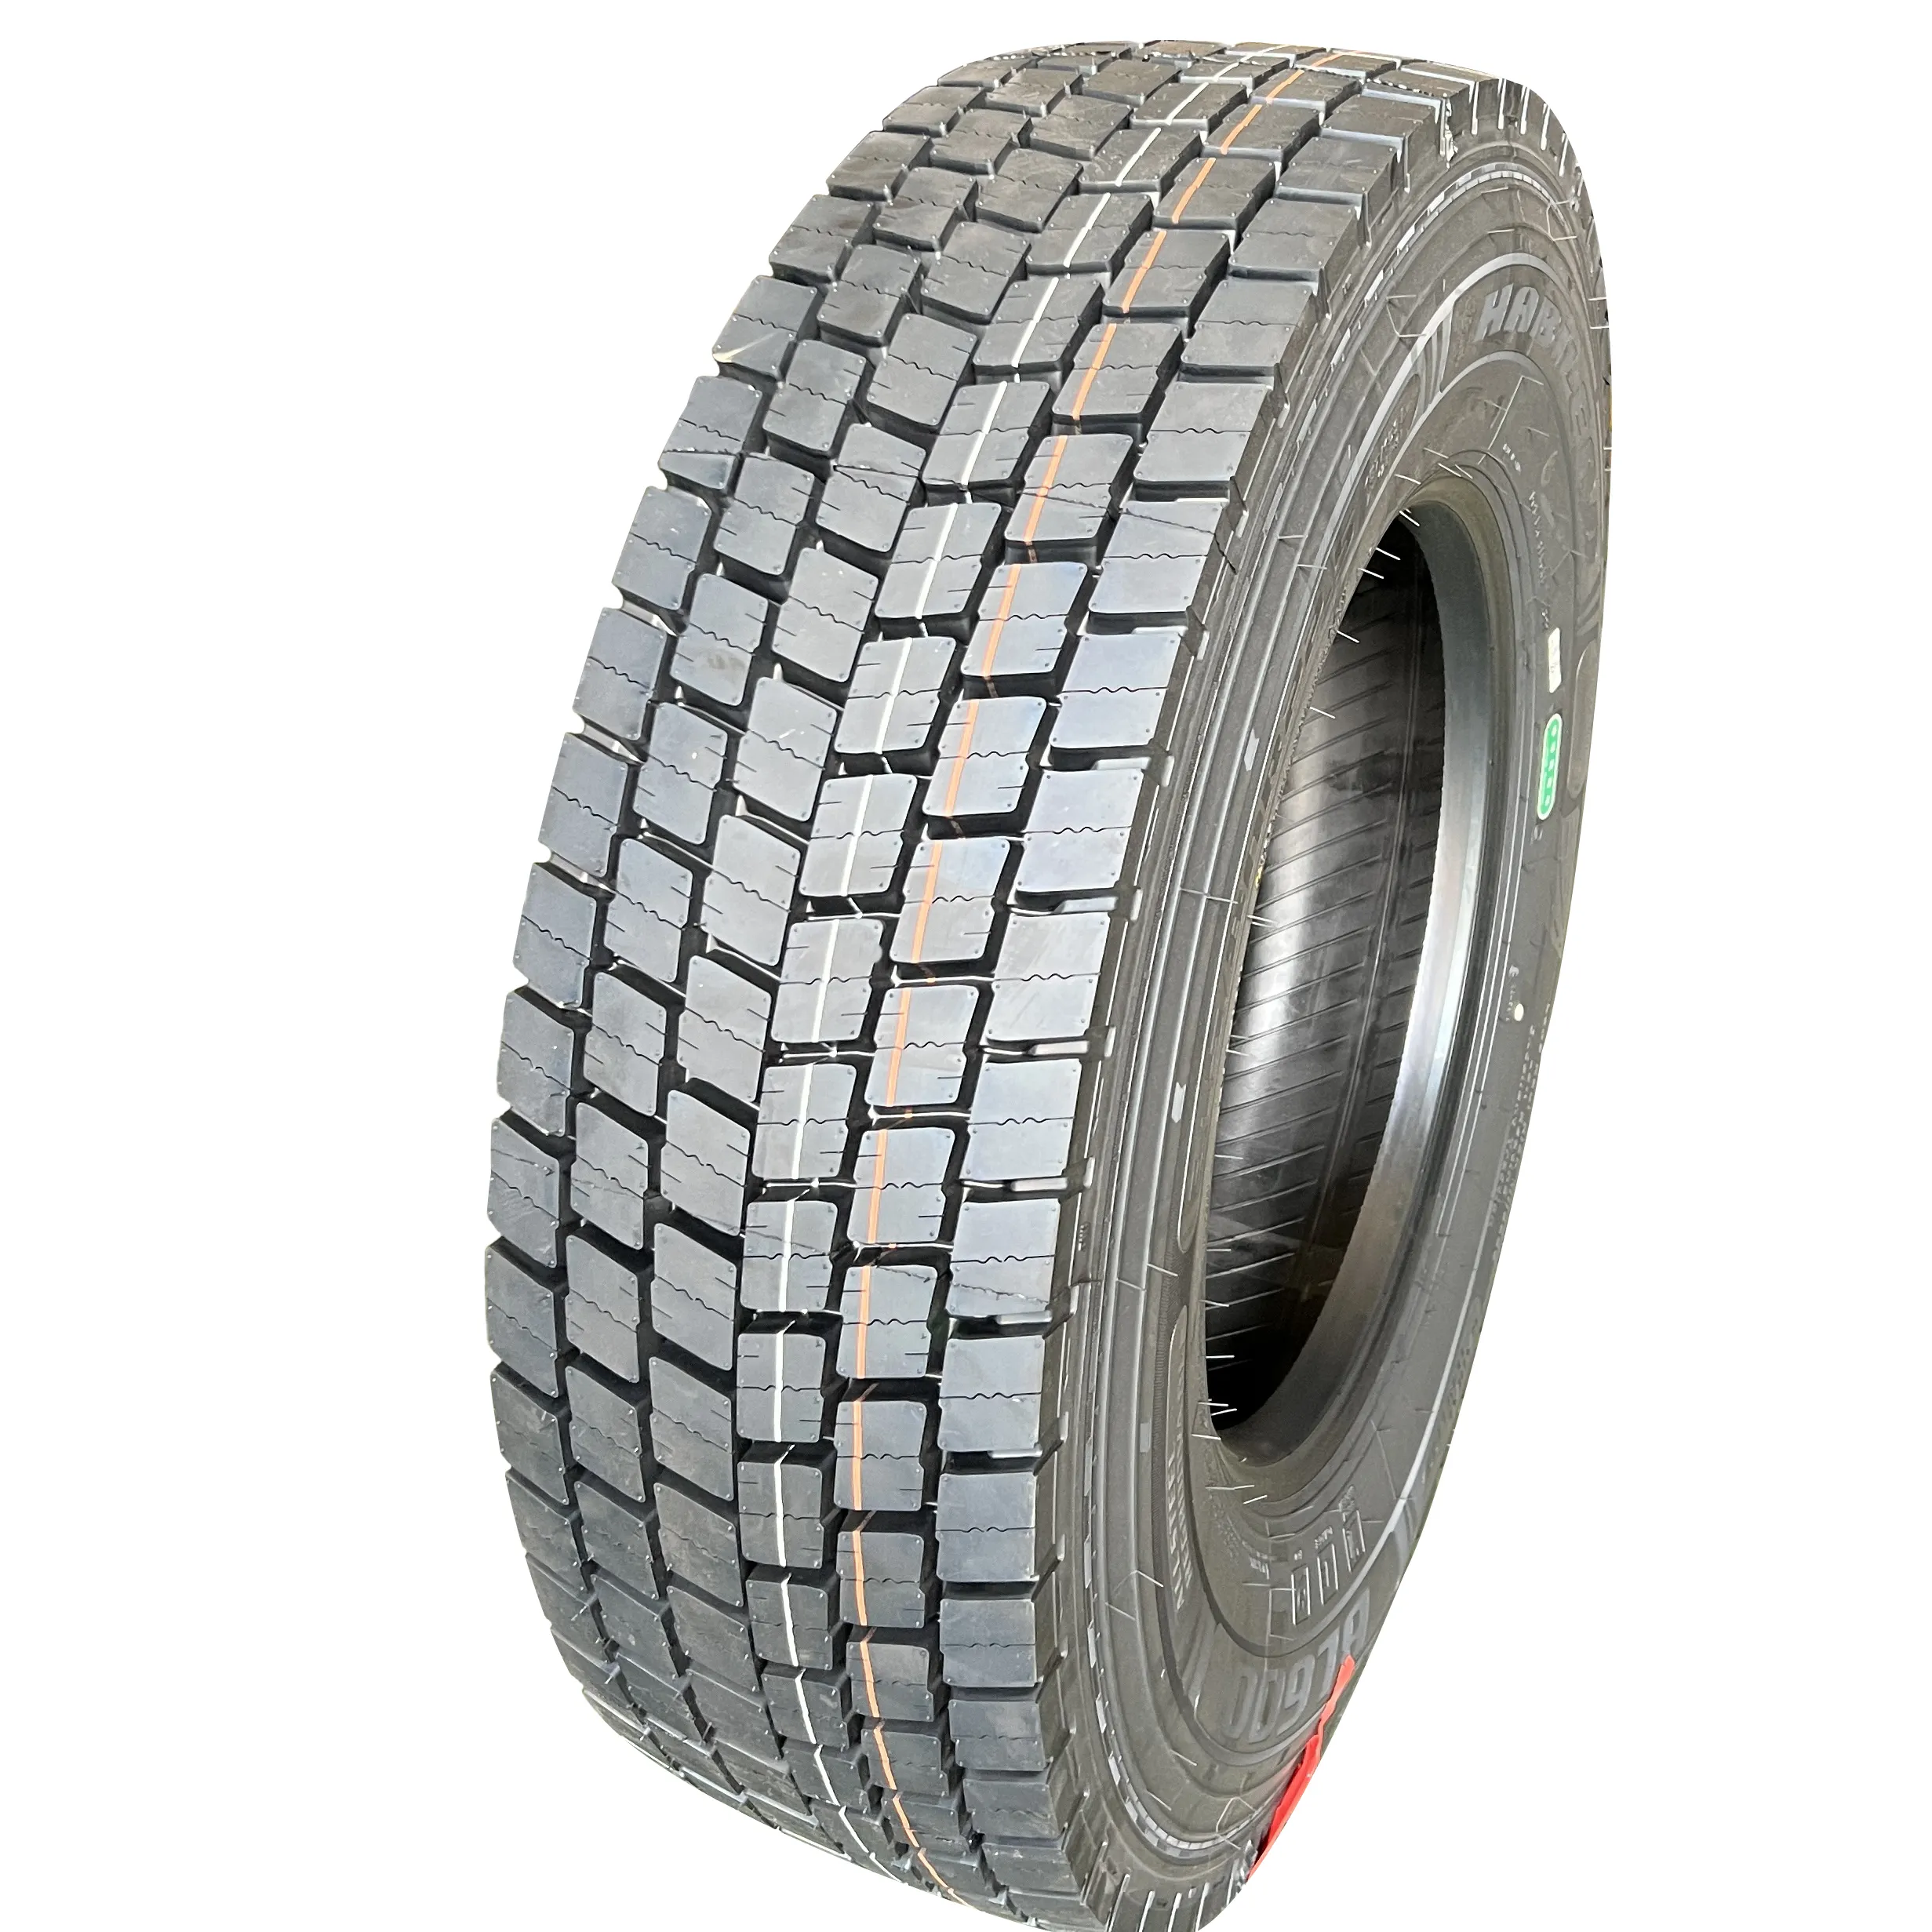 The high-quality factory-priced 315 80r22.5 Wholesale Truck Tyre are suitable for 22.5 x 9.00 truck rims